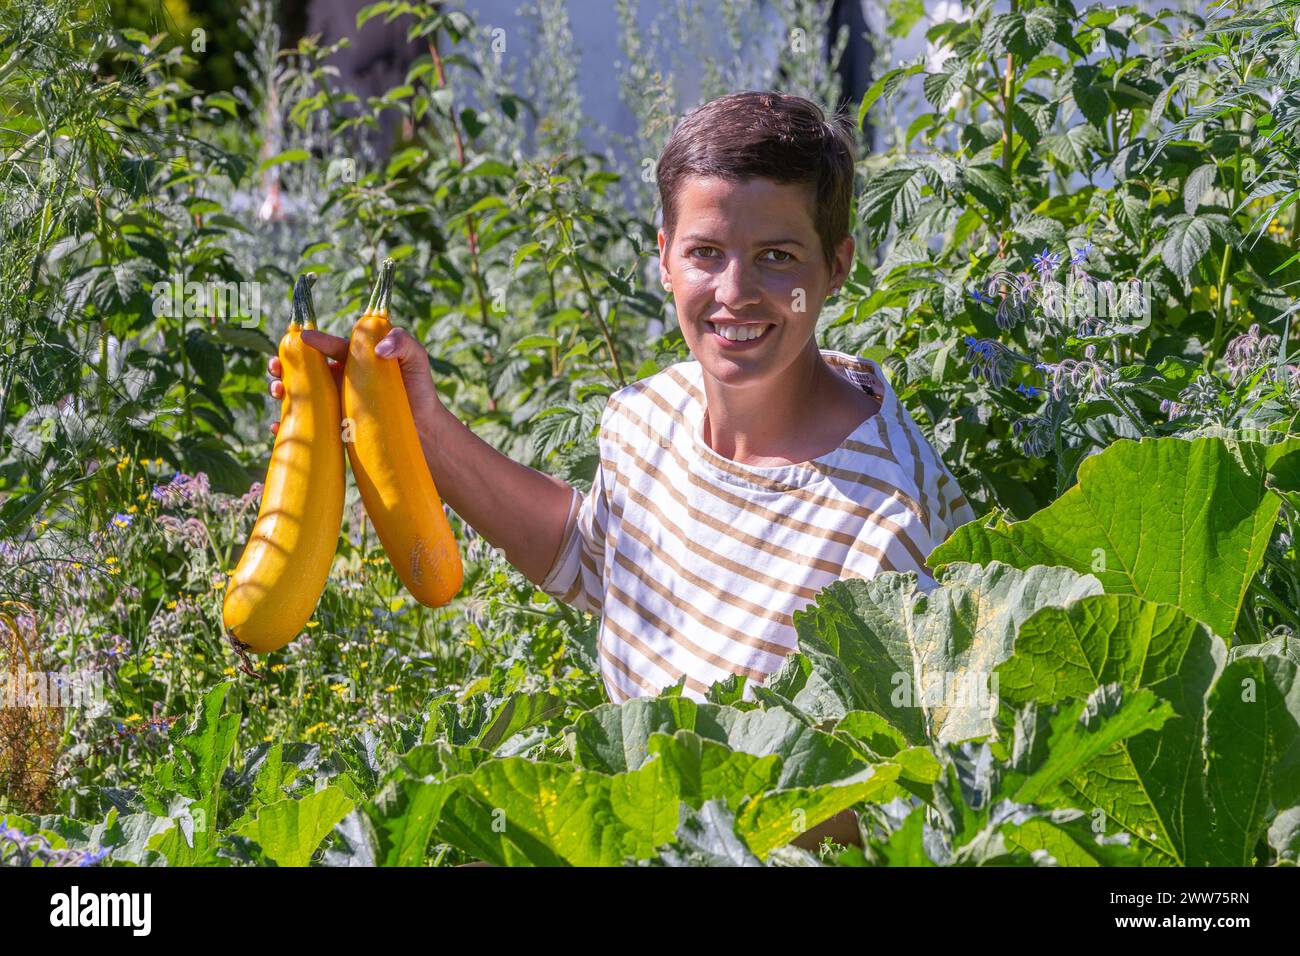 Young woman holding up two beautiful yellow zucchinis. Stock Photo